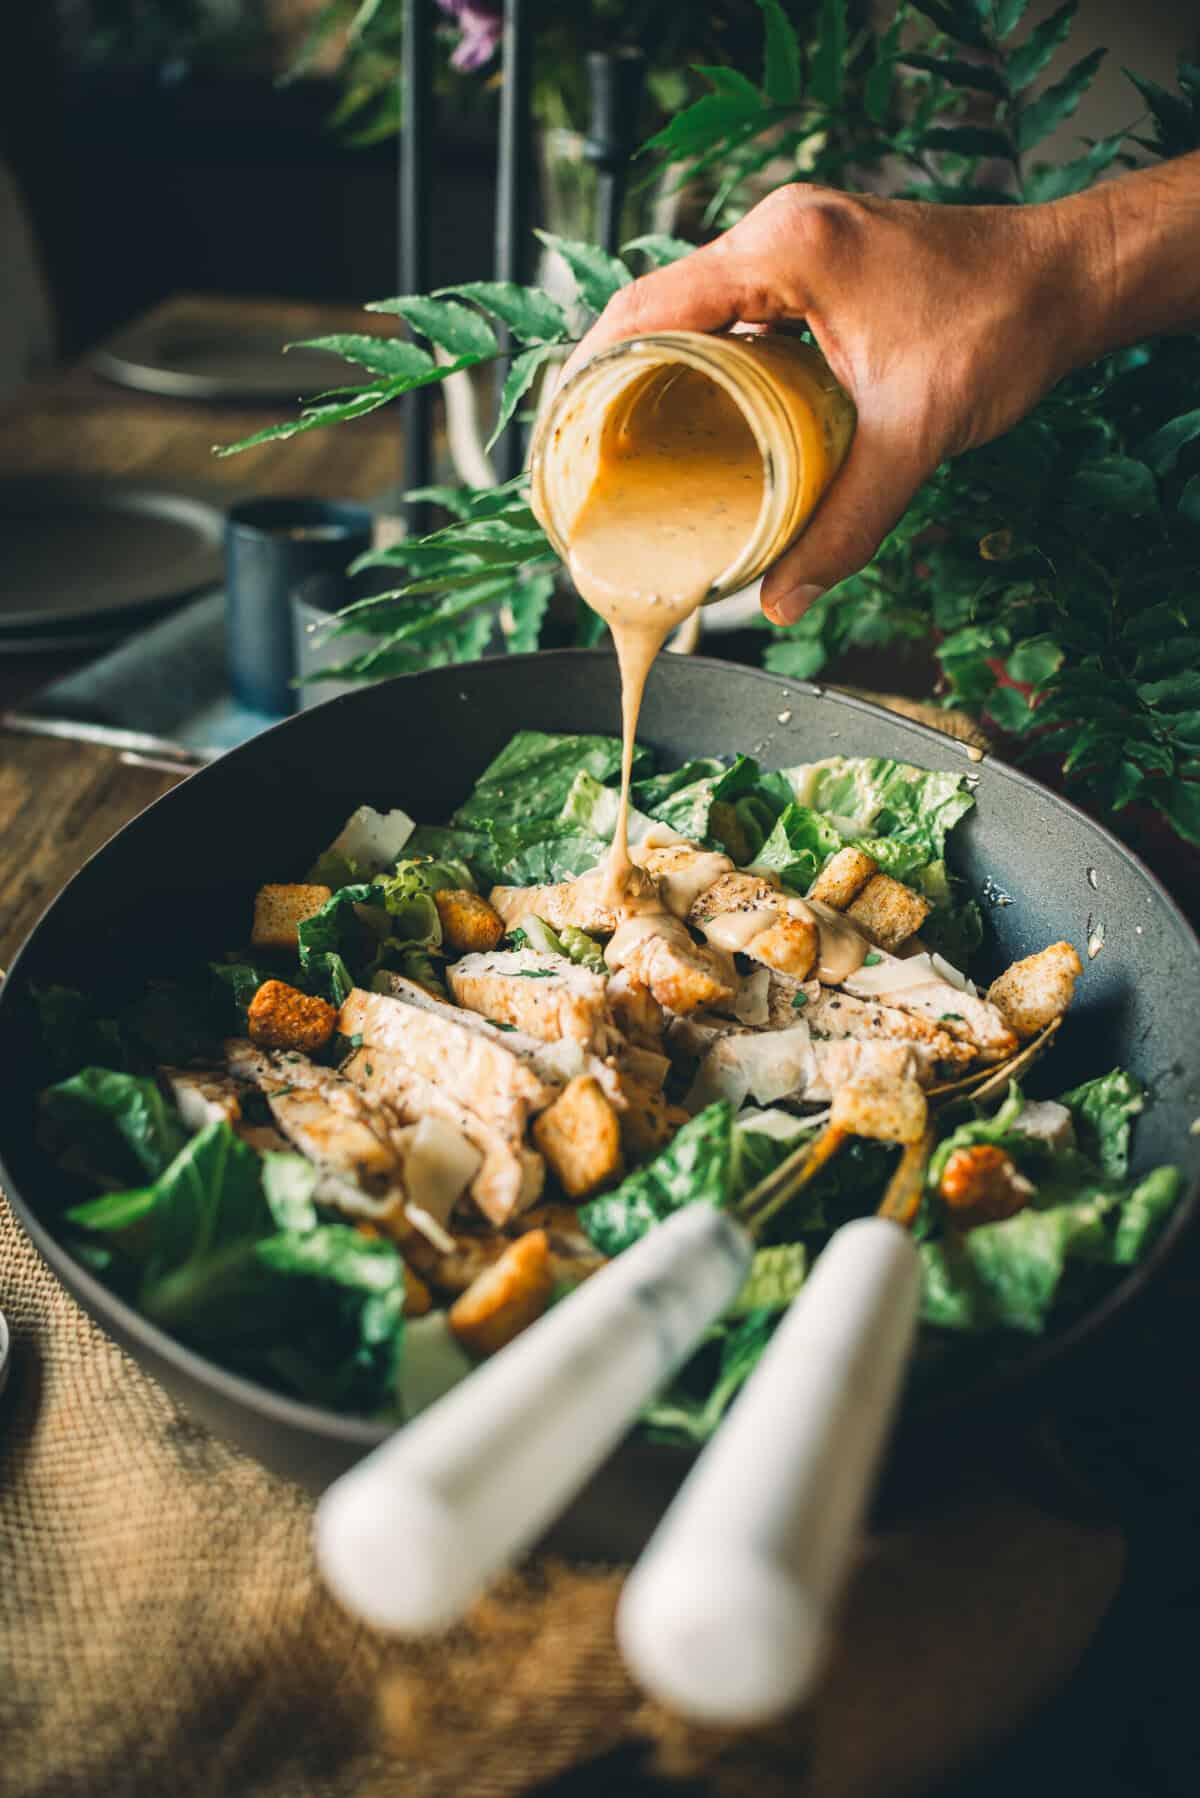 A hand pouring creamy dressing over a Caesar salad with croutons, grilled chicken, Parmesan cheese, and romaine lettuce, on a dark tabletop with greenery in the background.